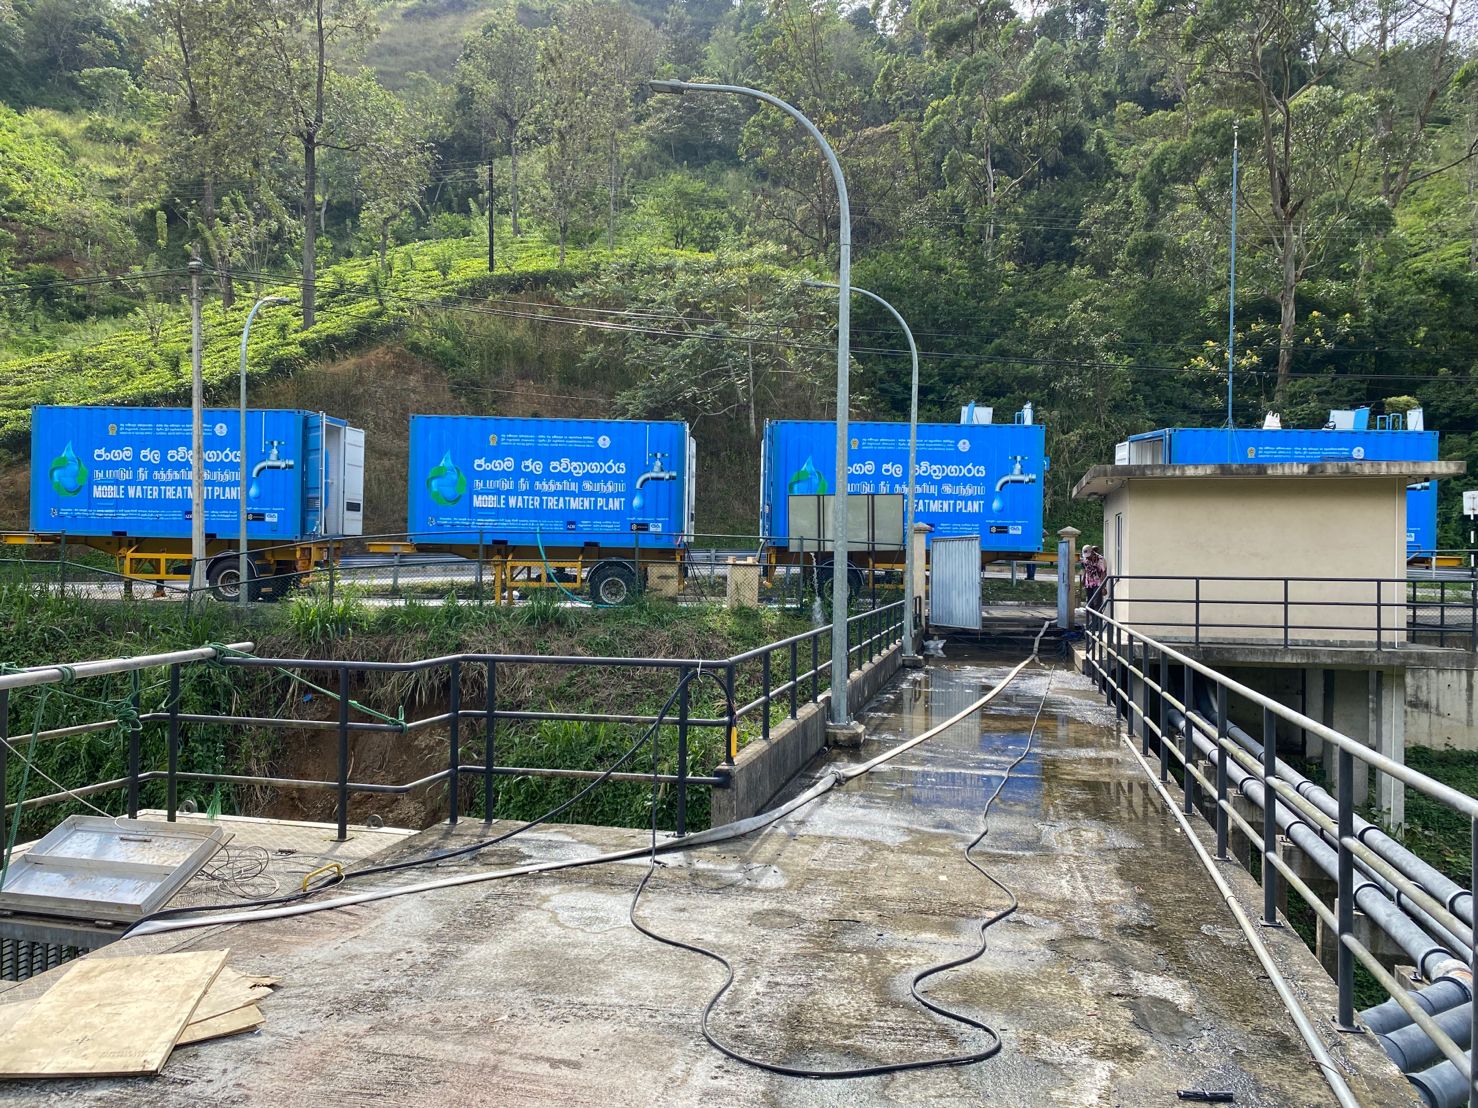 About the Sri Lanka Mobile Package Water Treatment Plants